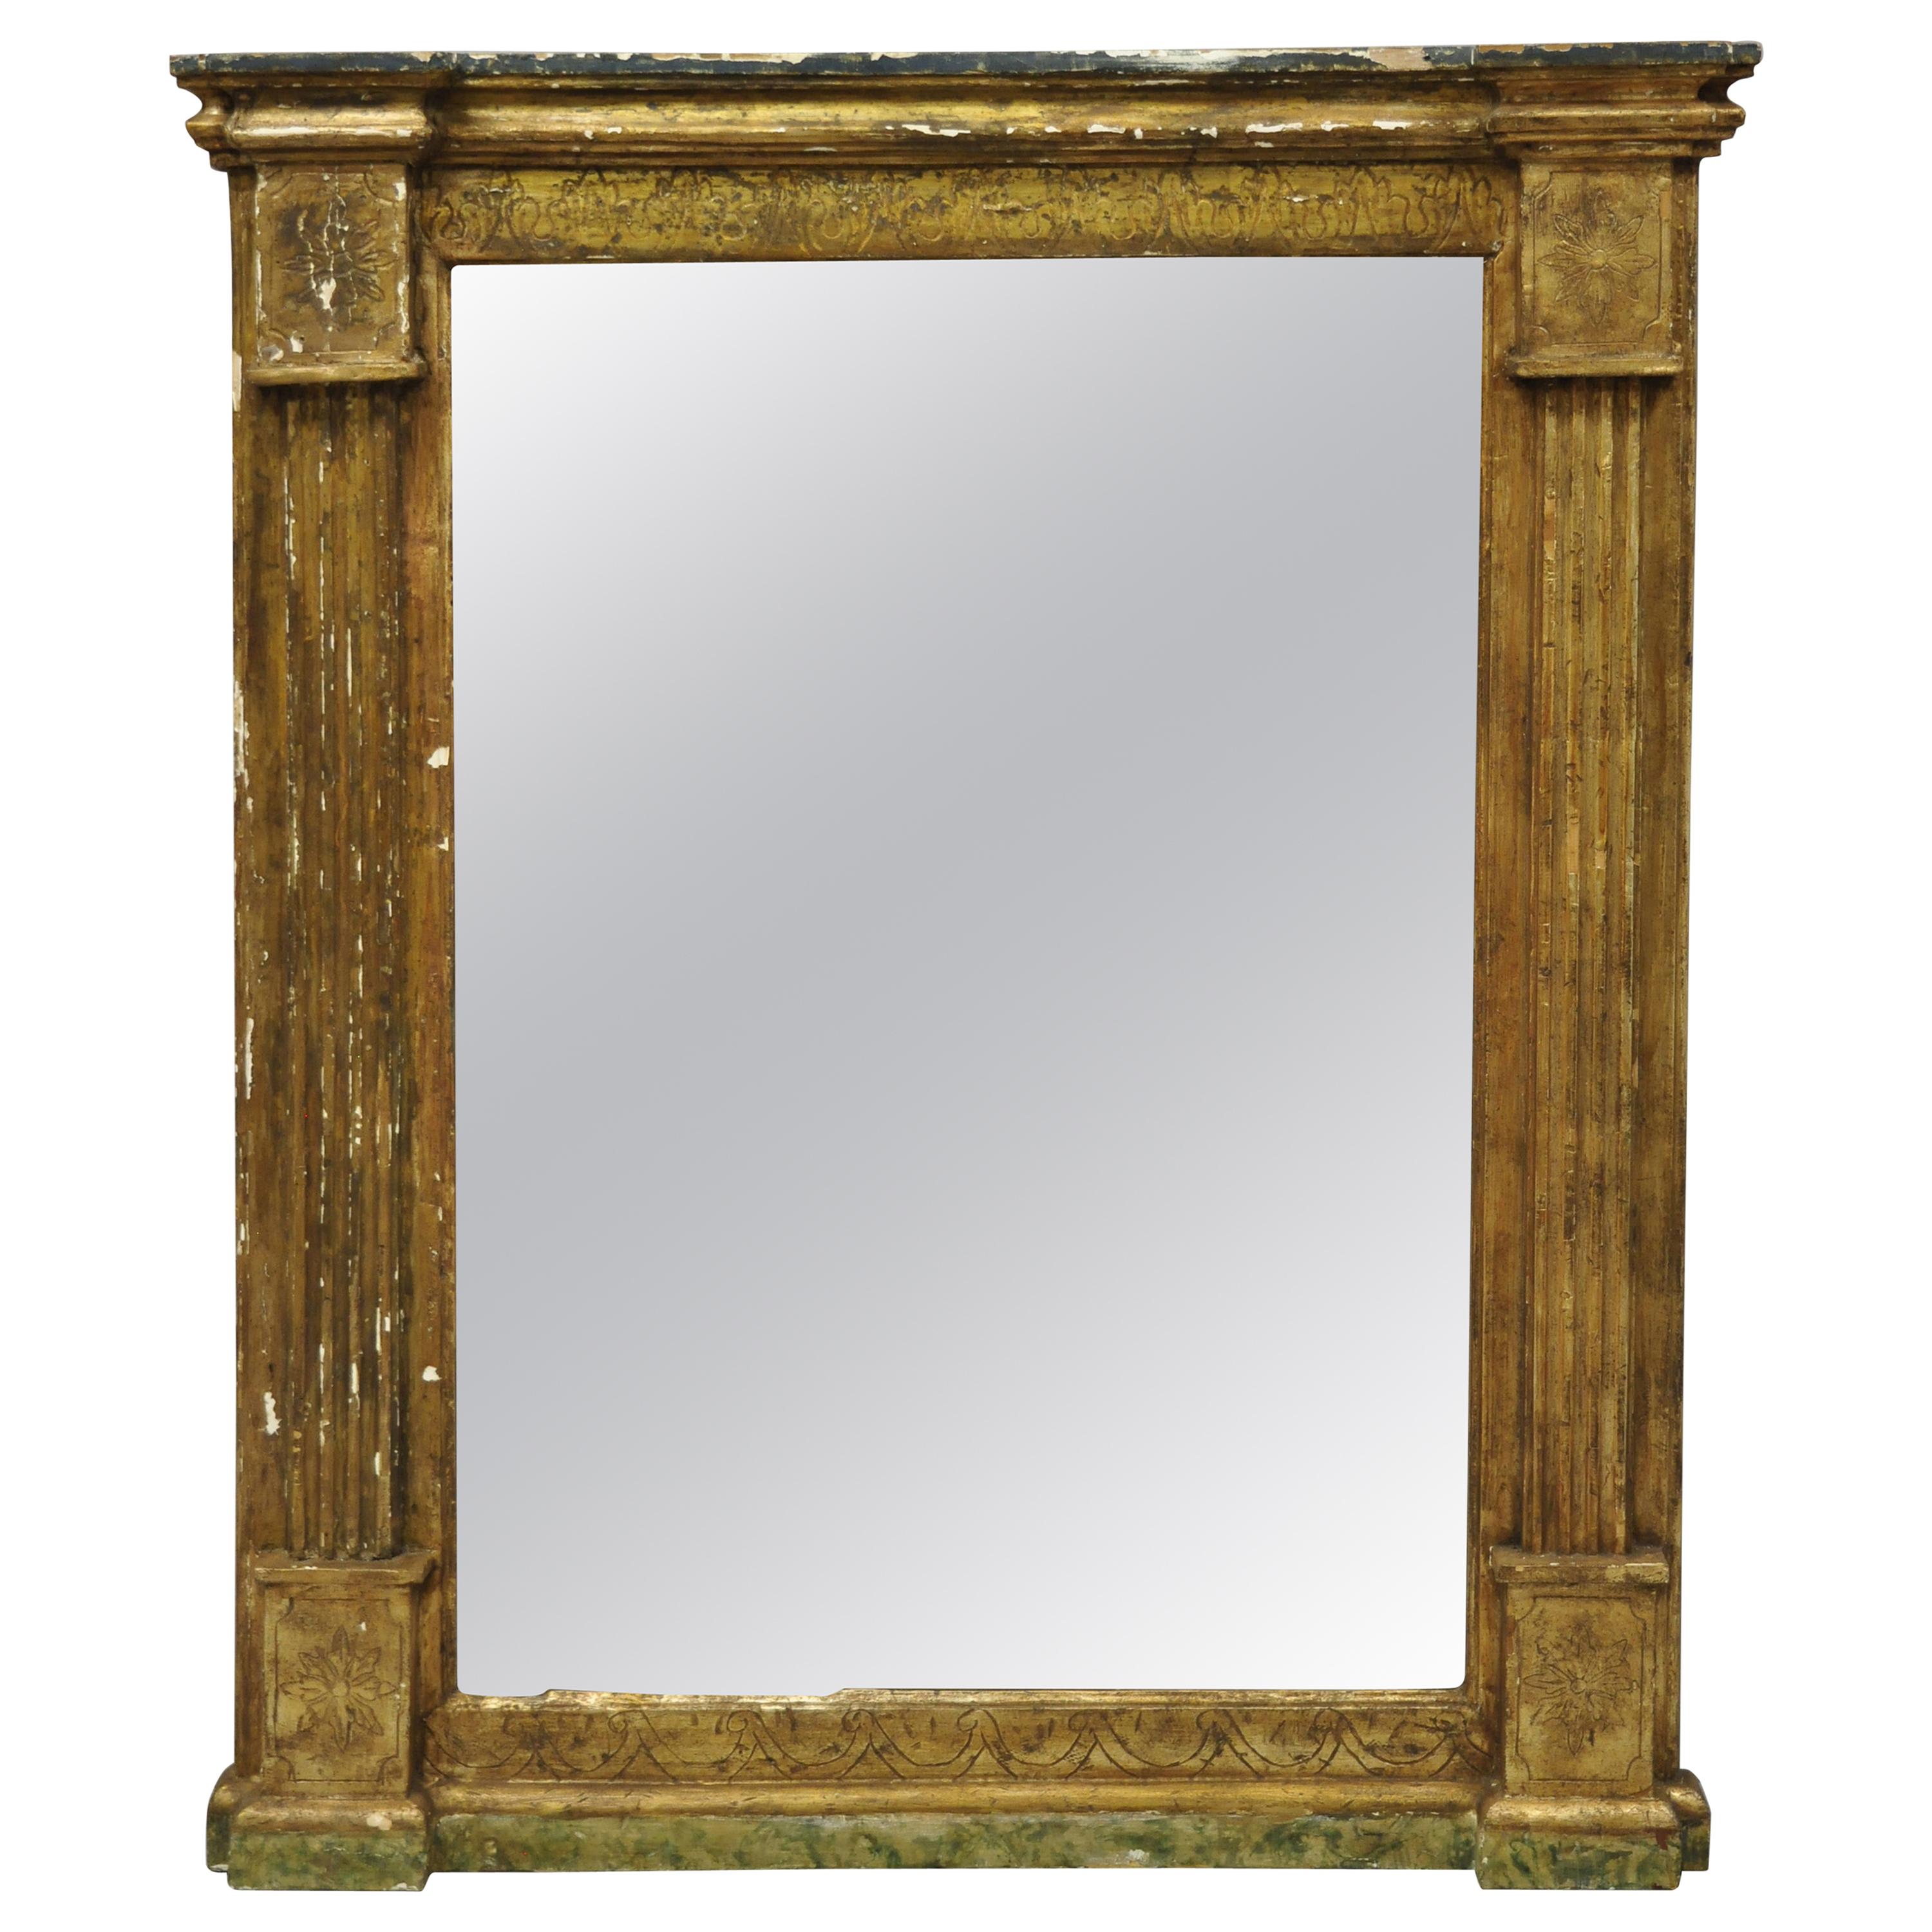 Italian Classical Florentine Giltwood Distressed Gold Looking Glass Wall Mirror